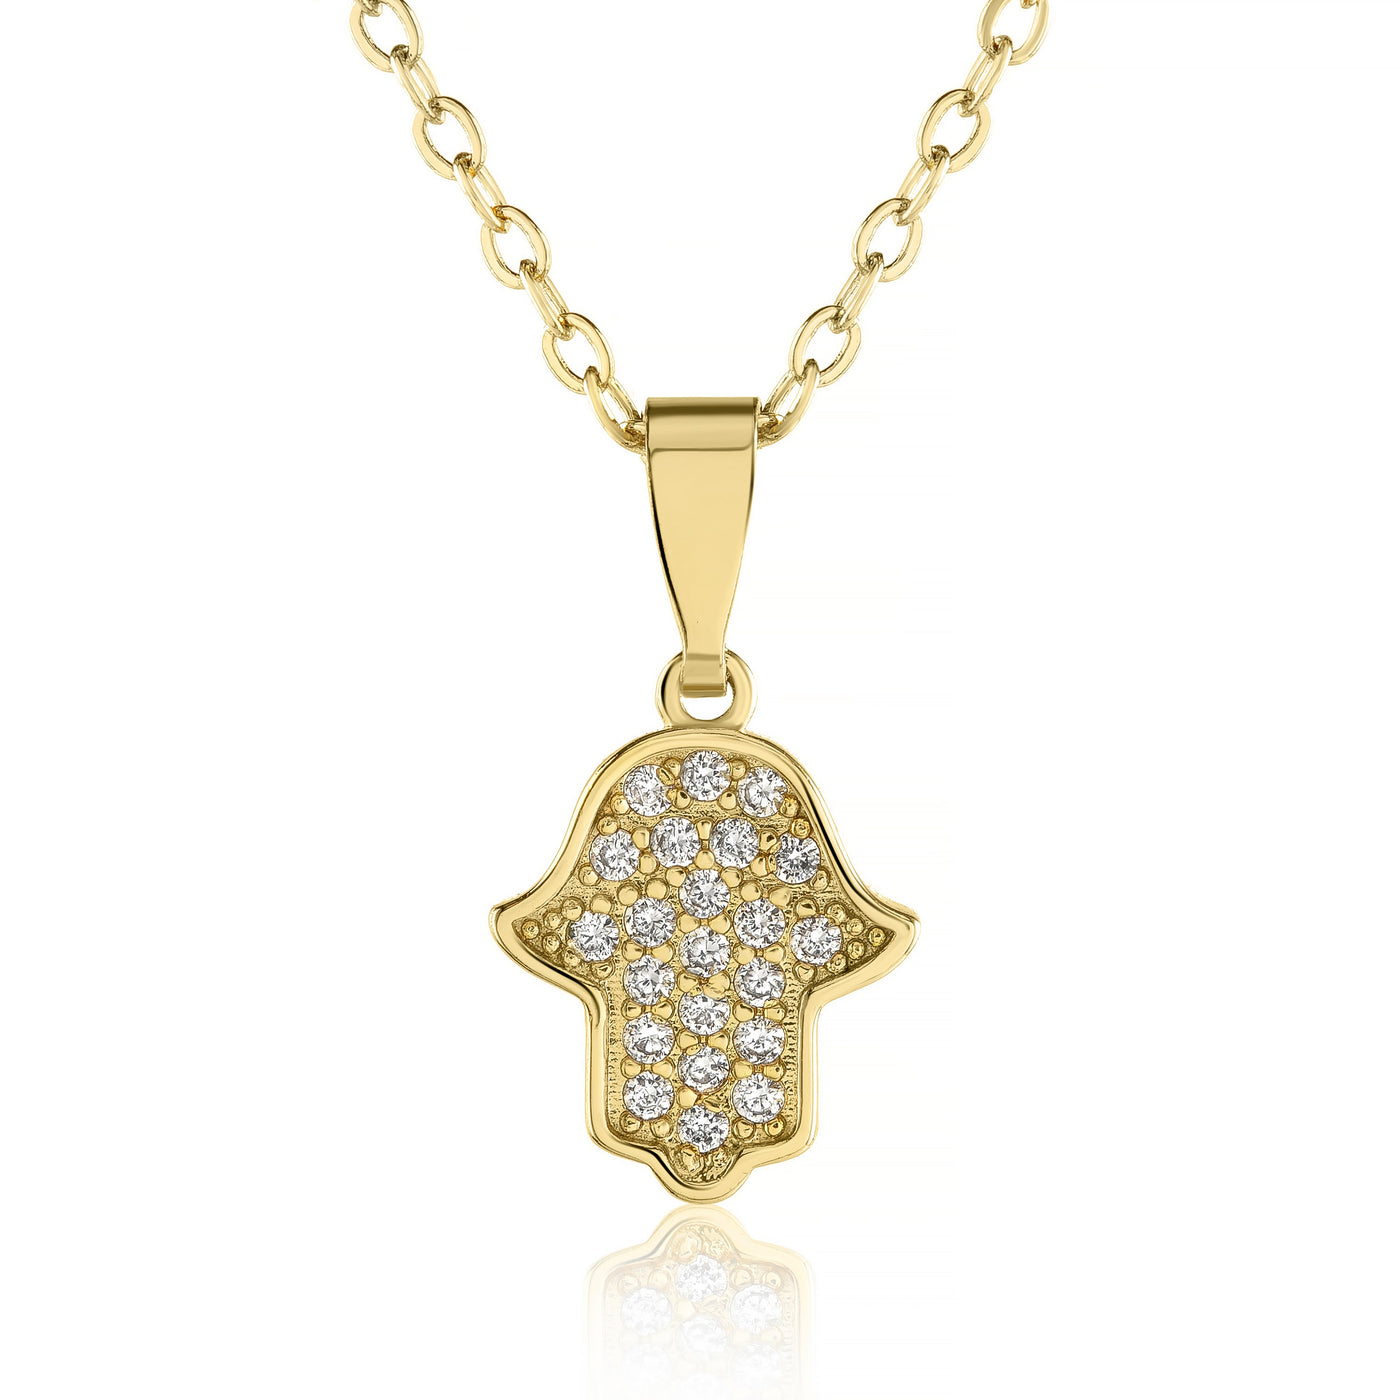 Hamsa Necklace with a Timeless Style - Naomi